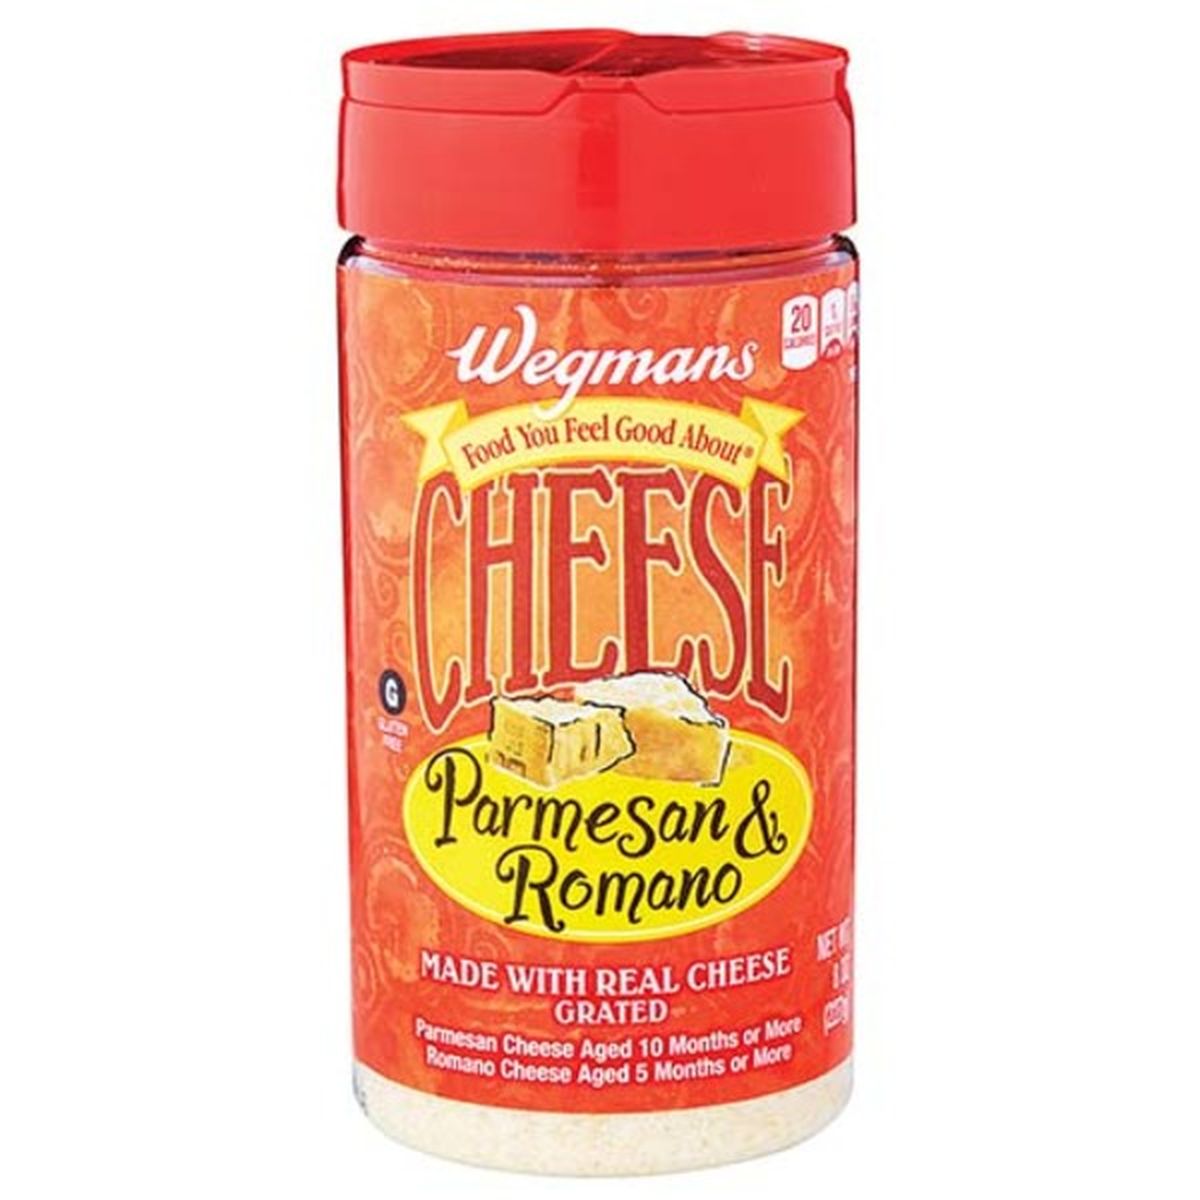 Calories in Wegmans Parmesan & Romano Grated Cheese